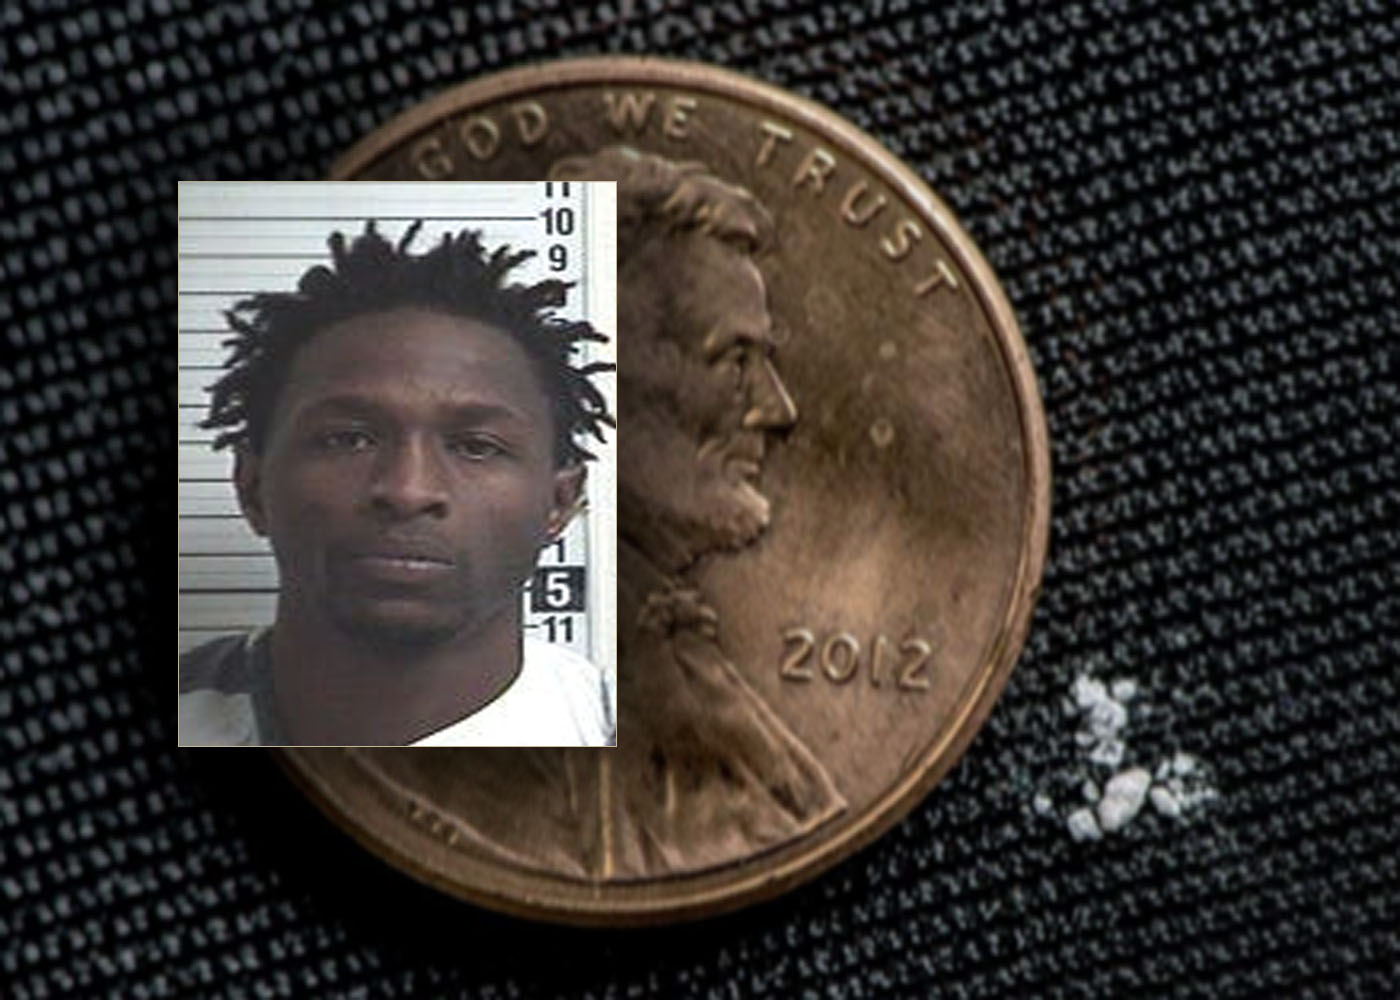 Police seize enough fentanyl Friday to kill every man, woman and child in Panama City